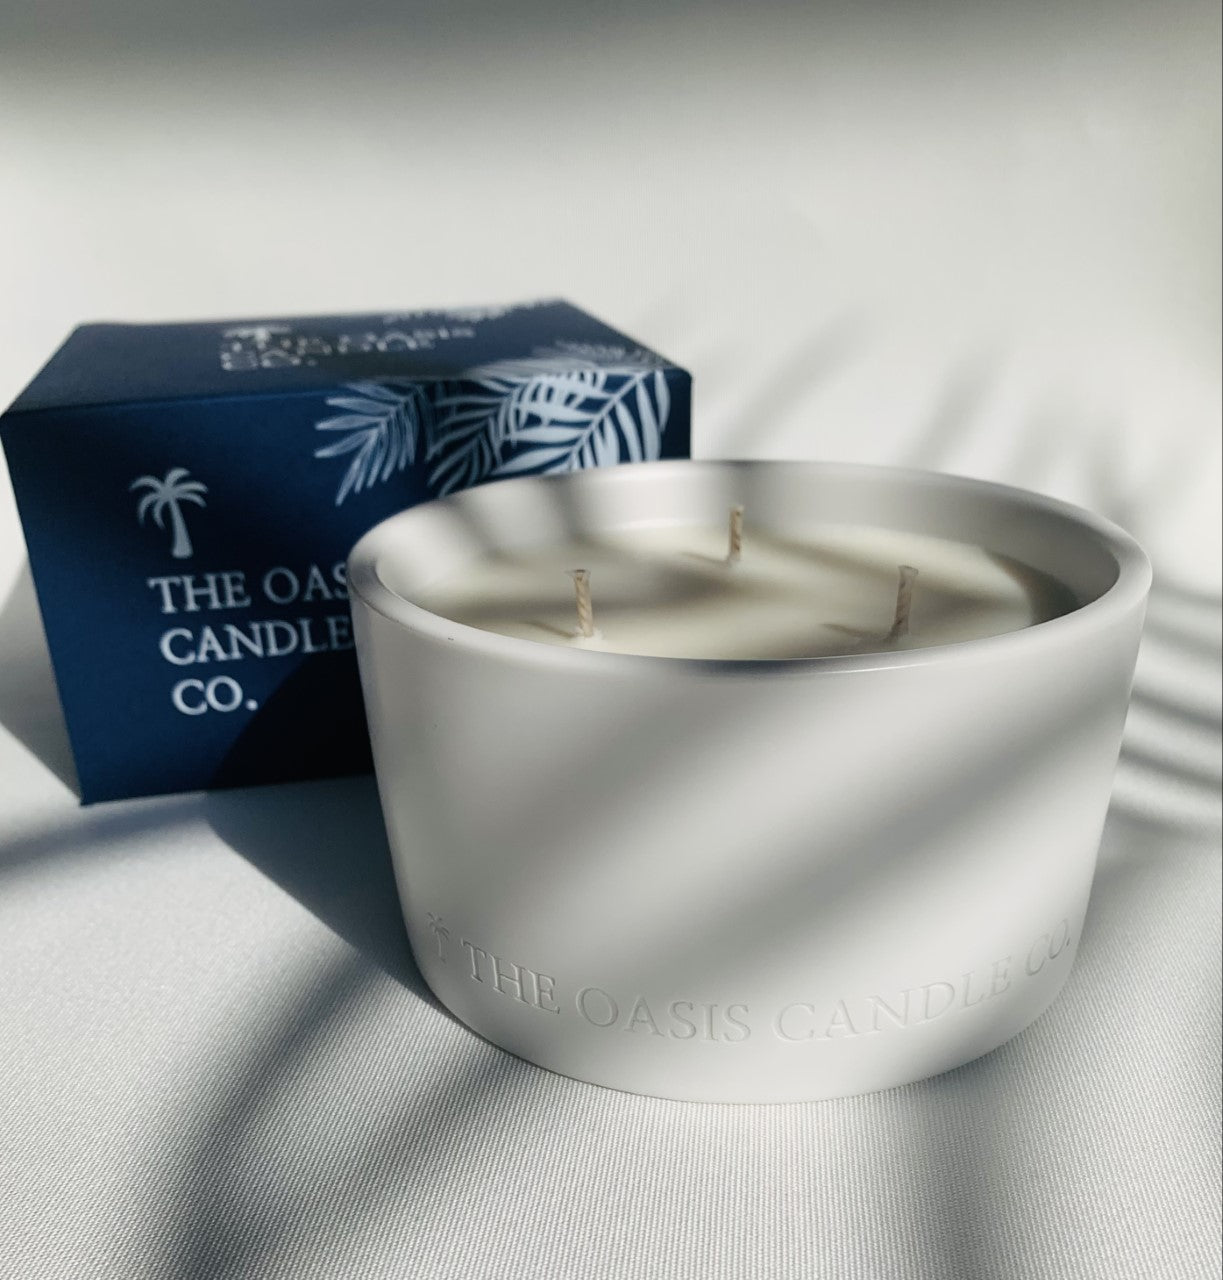 Dark Honey and Tobacco candles dubai from home fragrance brand, The Oasis Candle Co